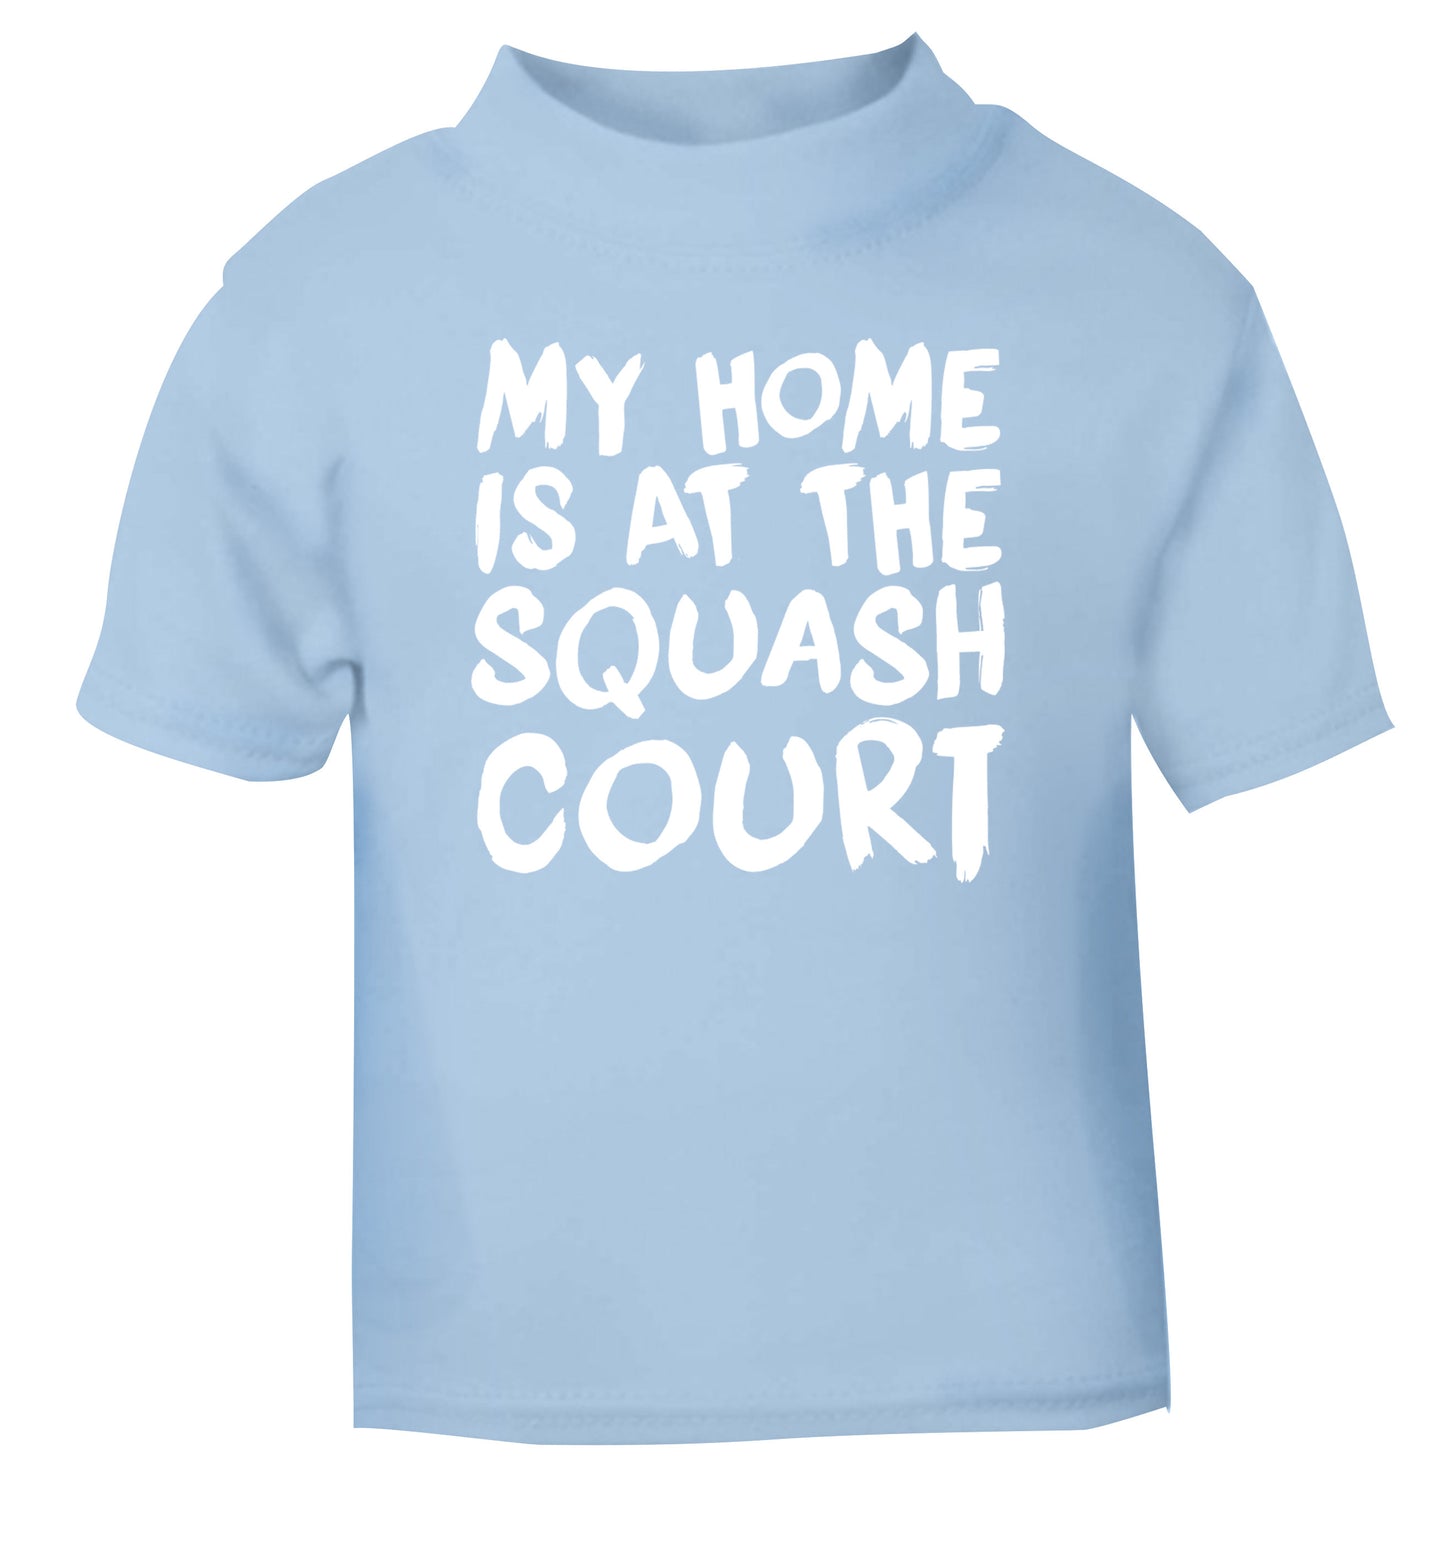 My home is at the squash court light blue Baby Toddler Tshirt 2 Years